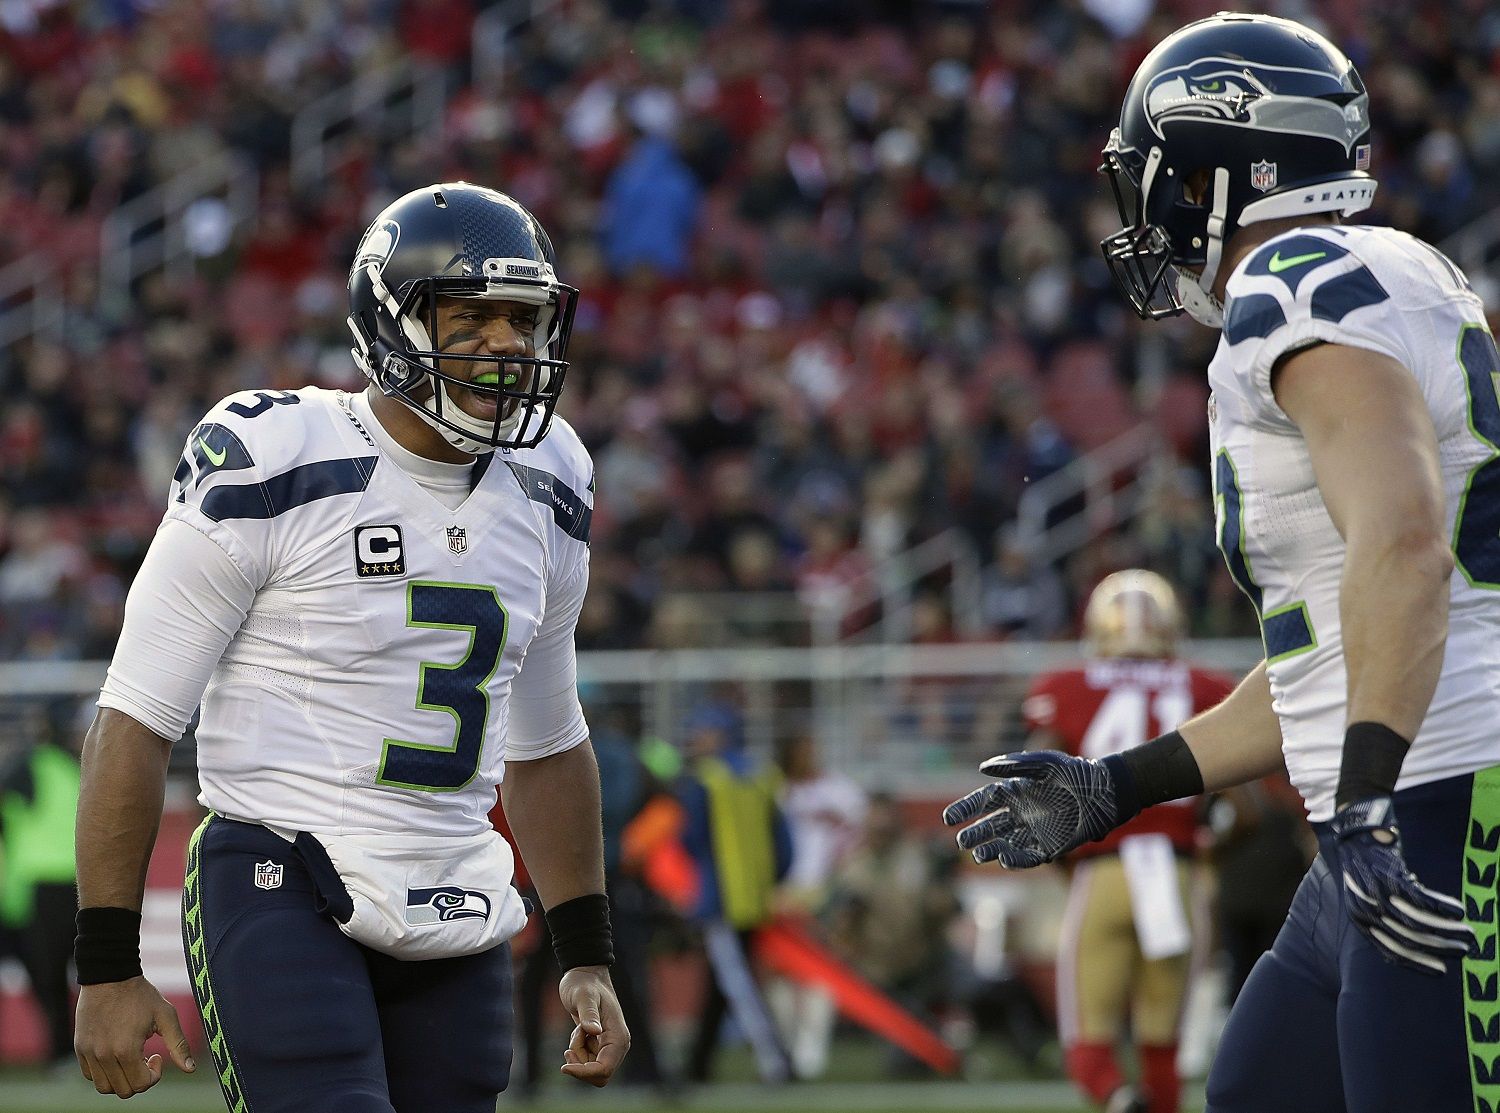 Seattle Seahawks quarterback Russell Wilson (3) and tight end Luke Willson, right, celebrate after connecting on a touchdown pass against the San Francisco 49ers during the first half of an NFL football game in Santa Clara, Calif., Sunday, Jan. 1, 2017. (AP Photo/Marcio Jose Sanchez)